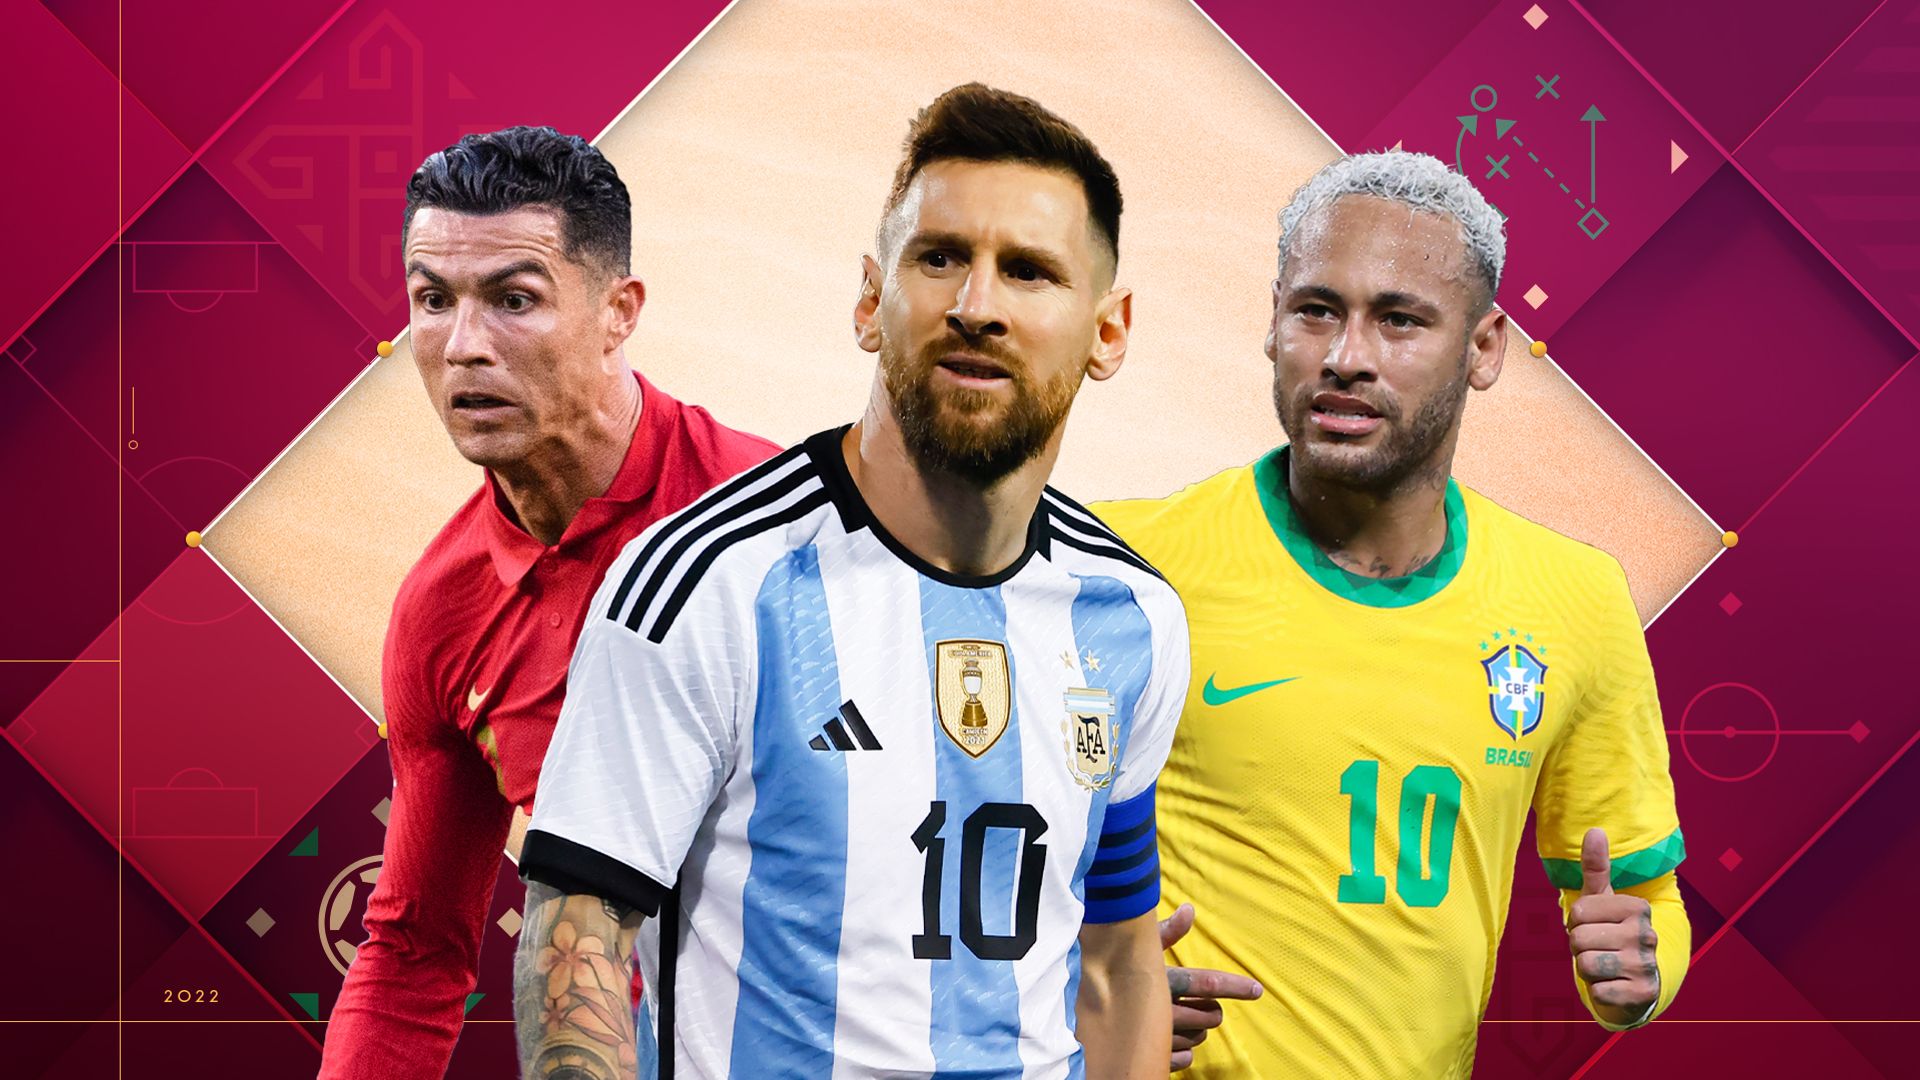 Messi, Ronaldo and Neymar have time to make this their World Cup